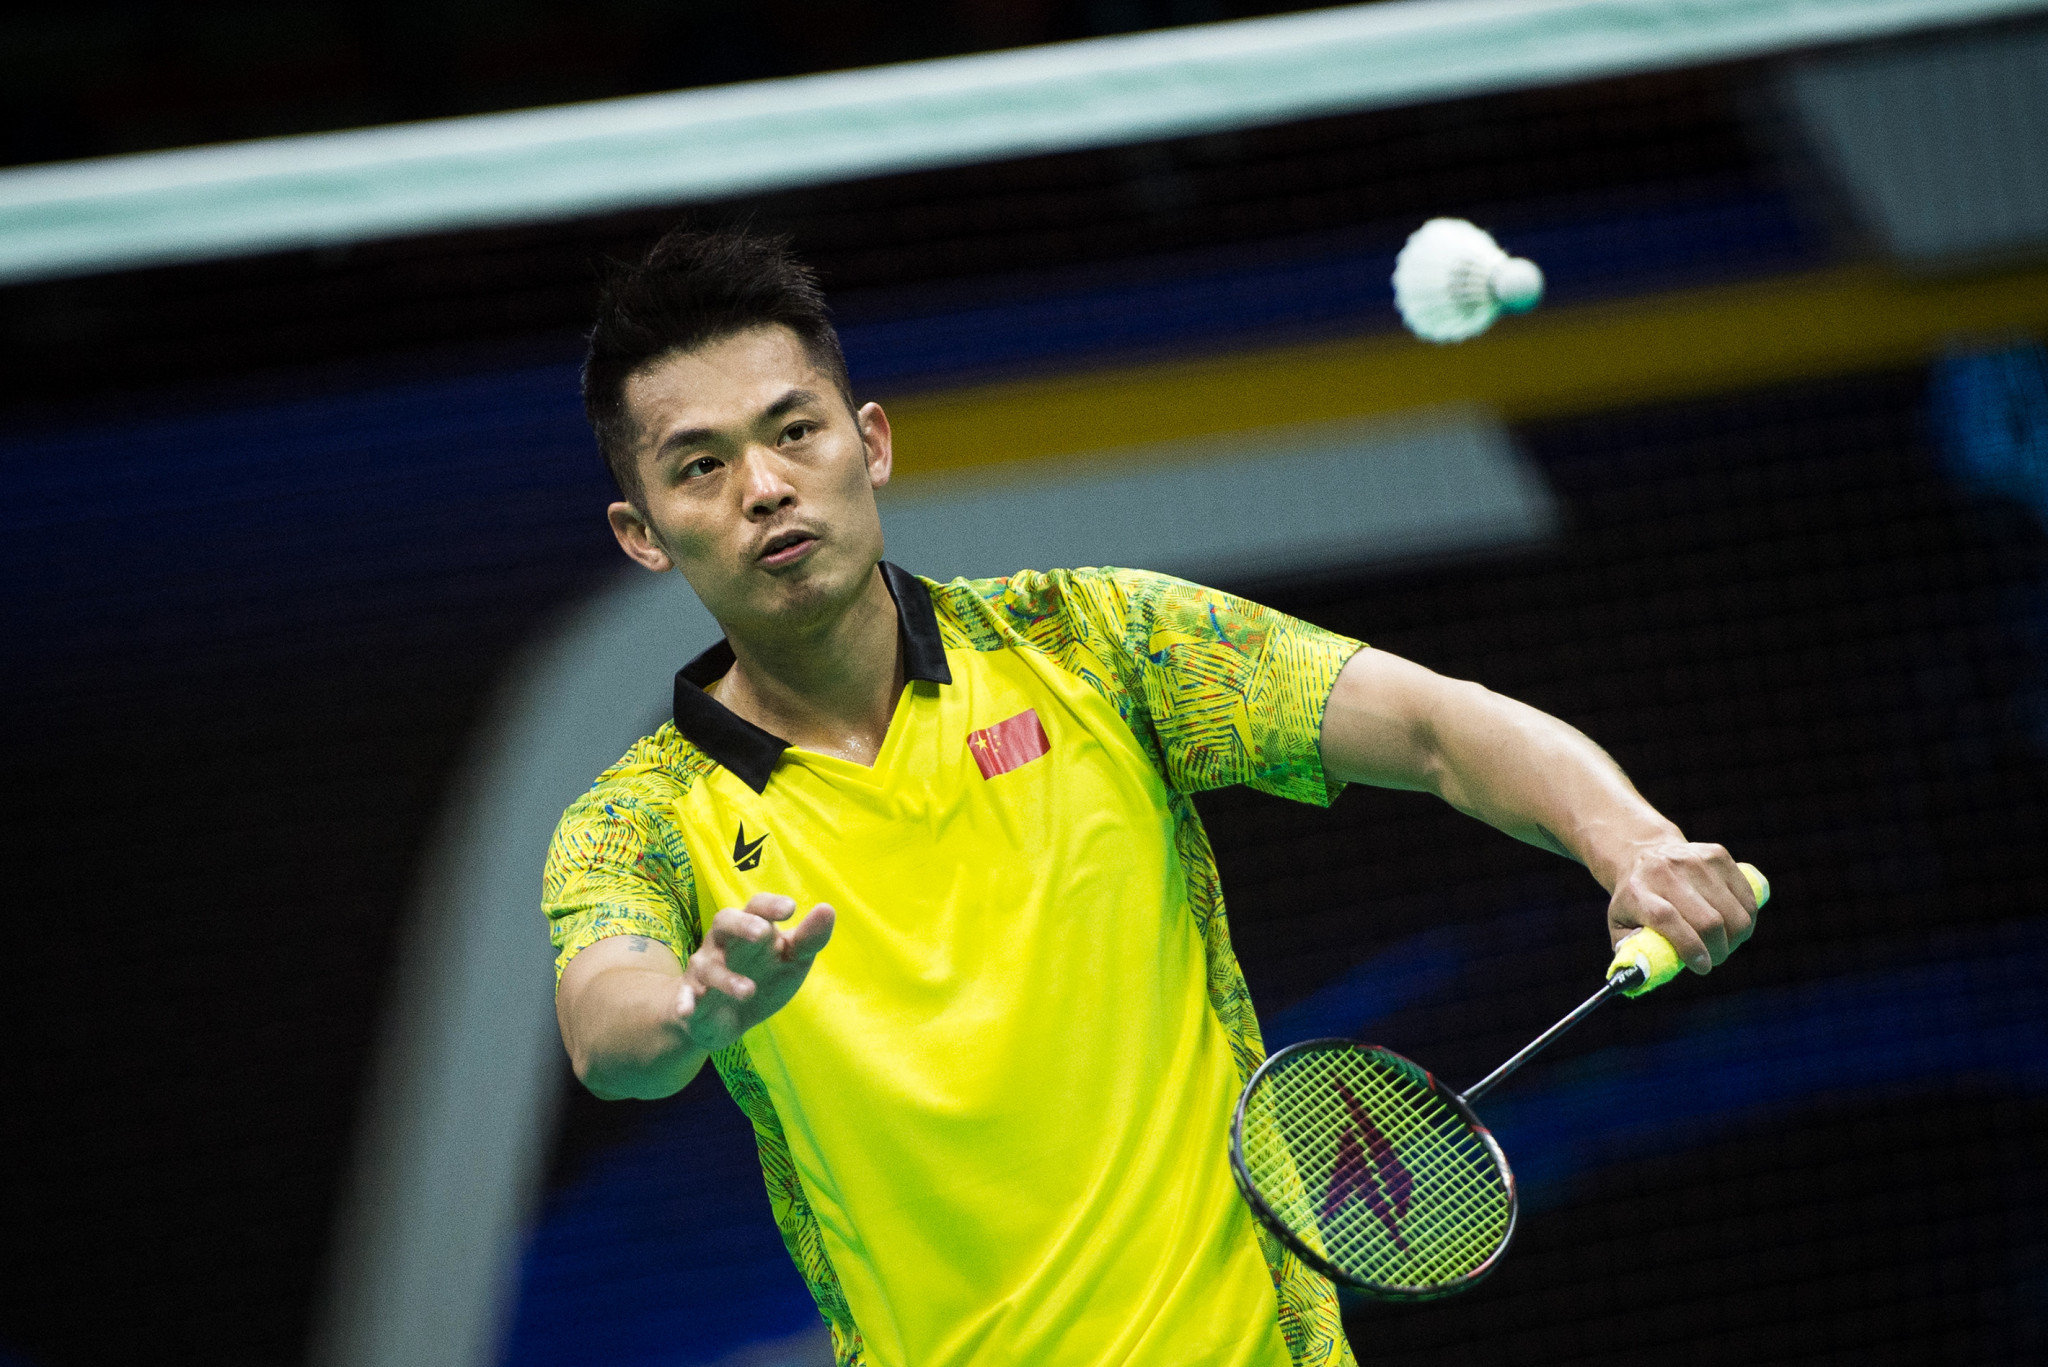 Lin Dan is the top seed in the men's singles tournament ©Getty Images